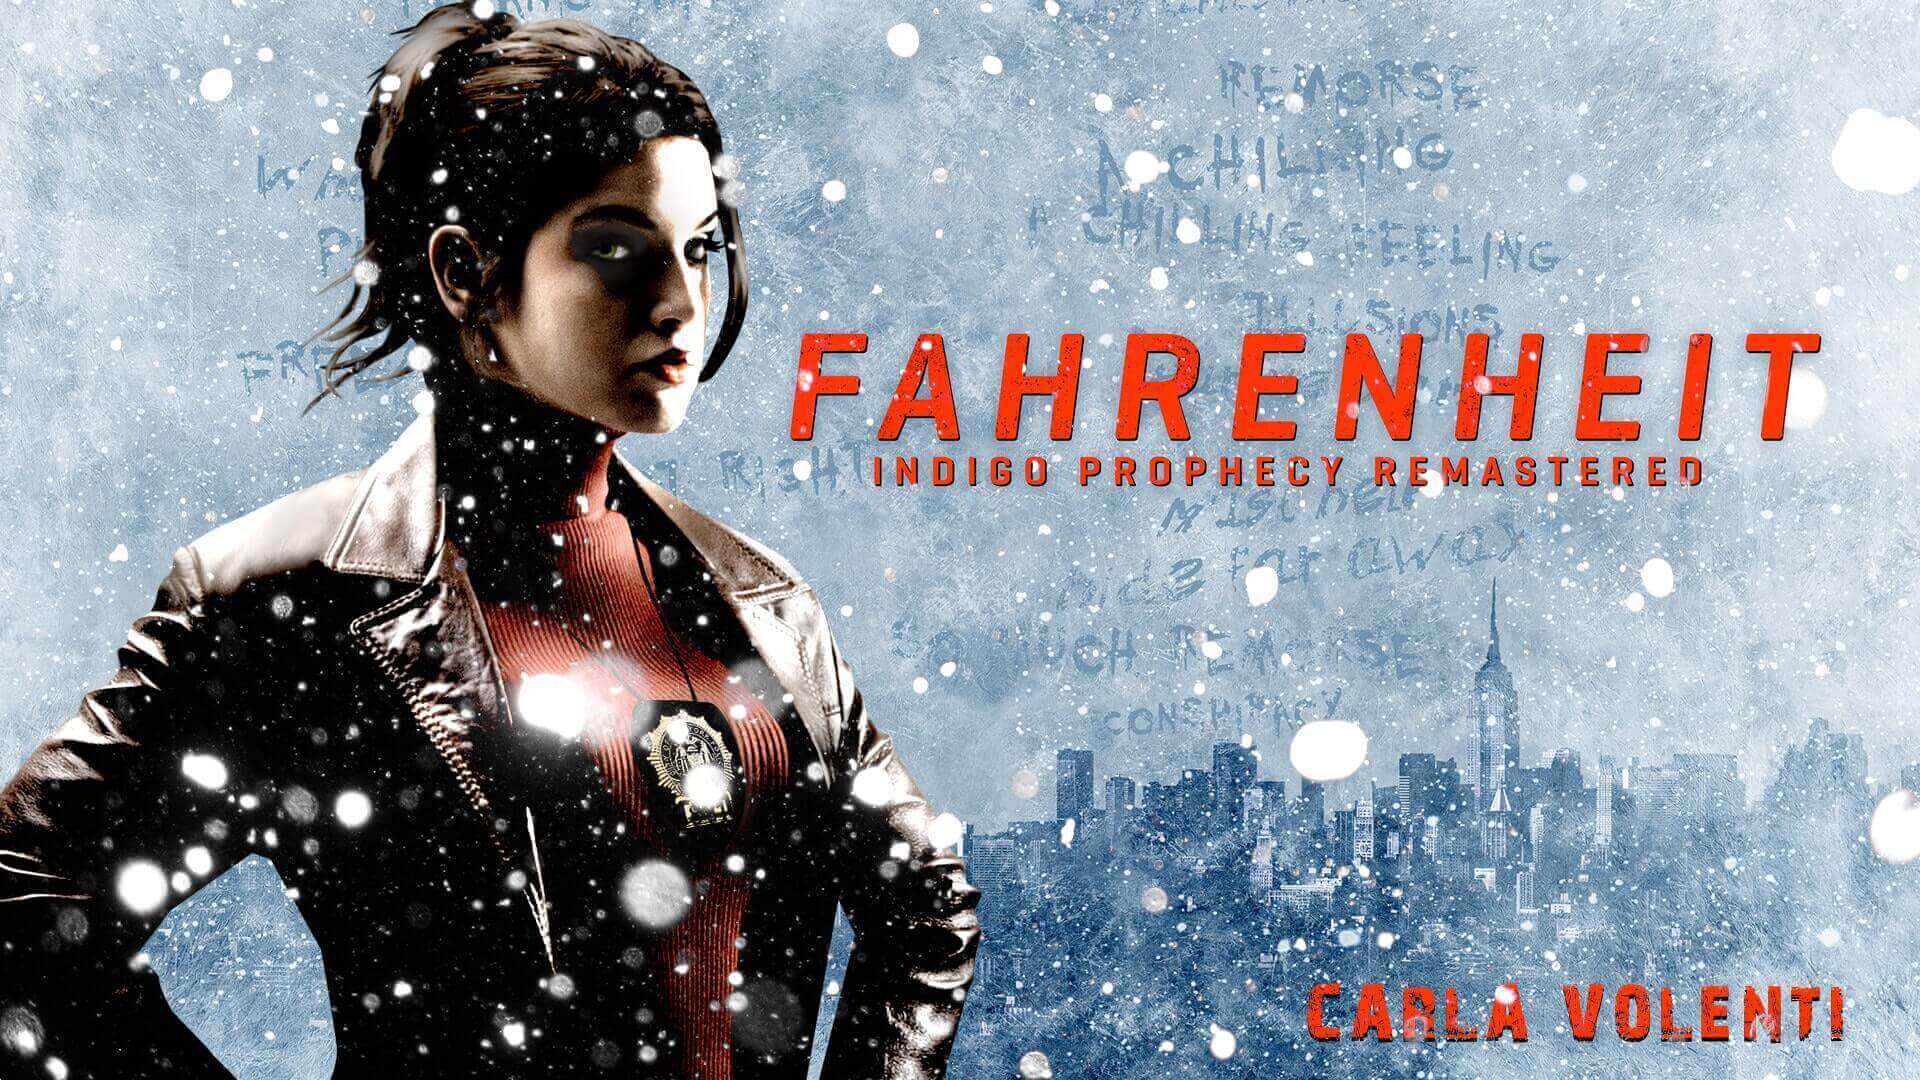 Indigo Prophecy Wallpaper (image in Collection)